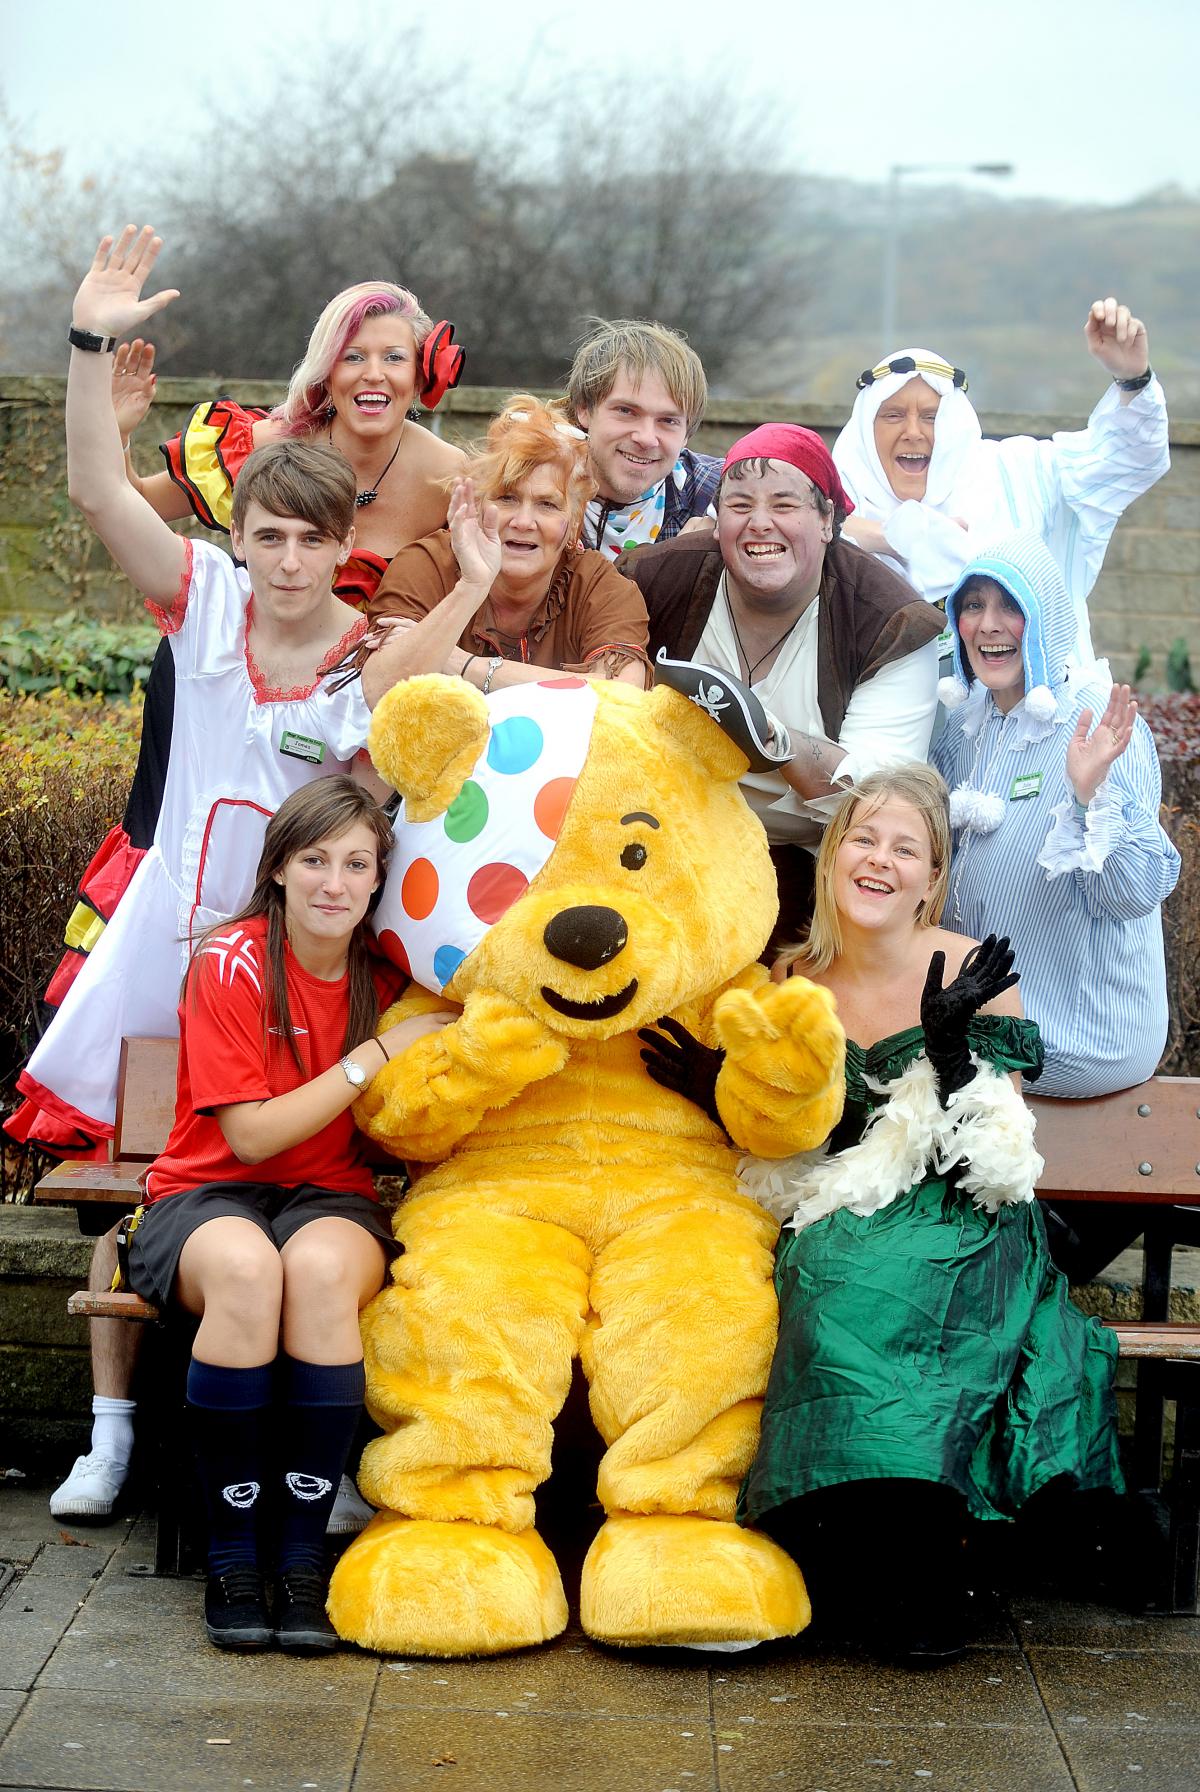 Staff at Asda donned fancy dress and were joined by Pudsey Bear in aid of Children in Need.